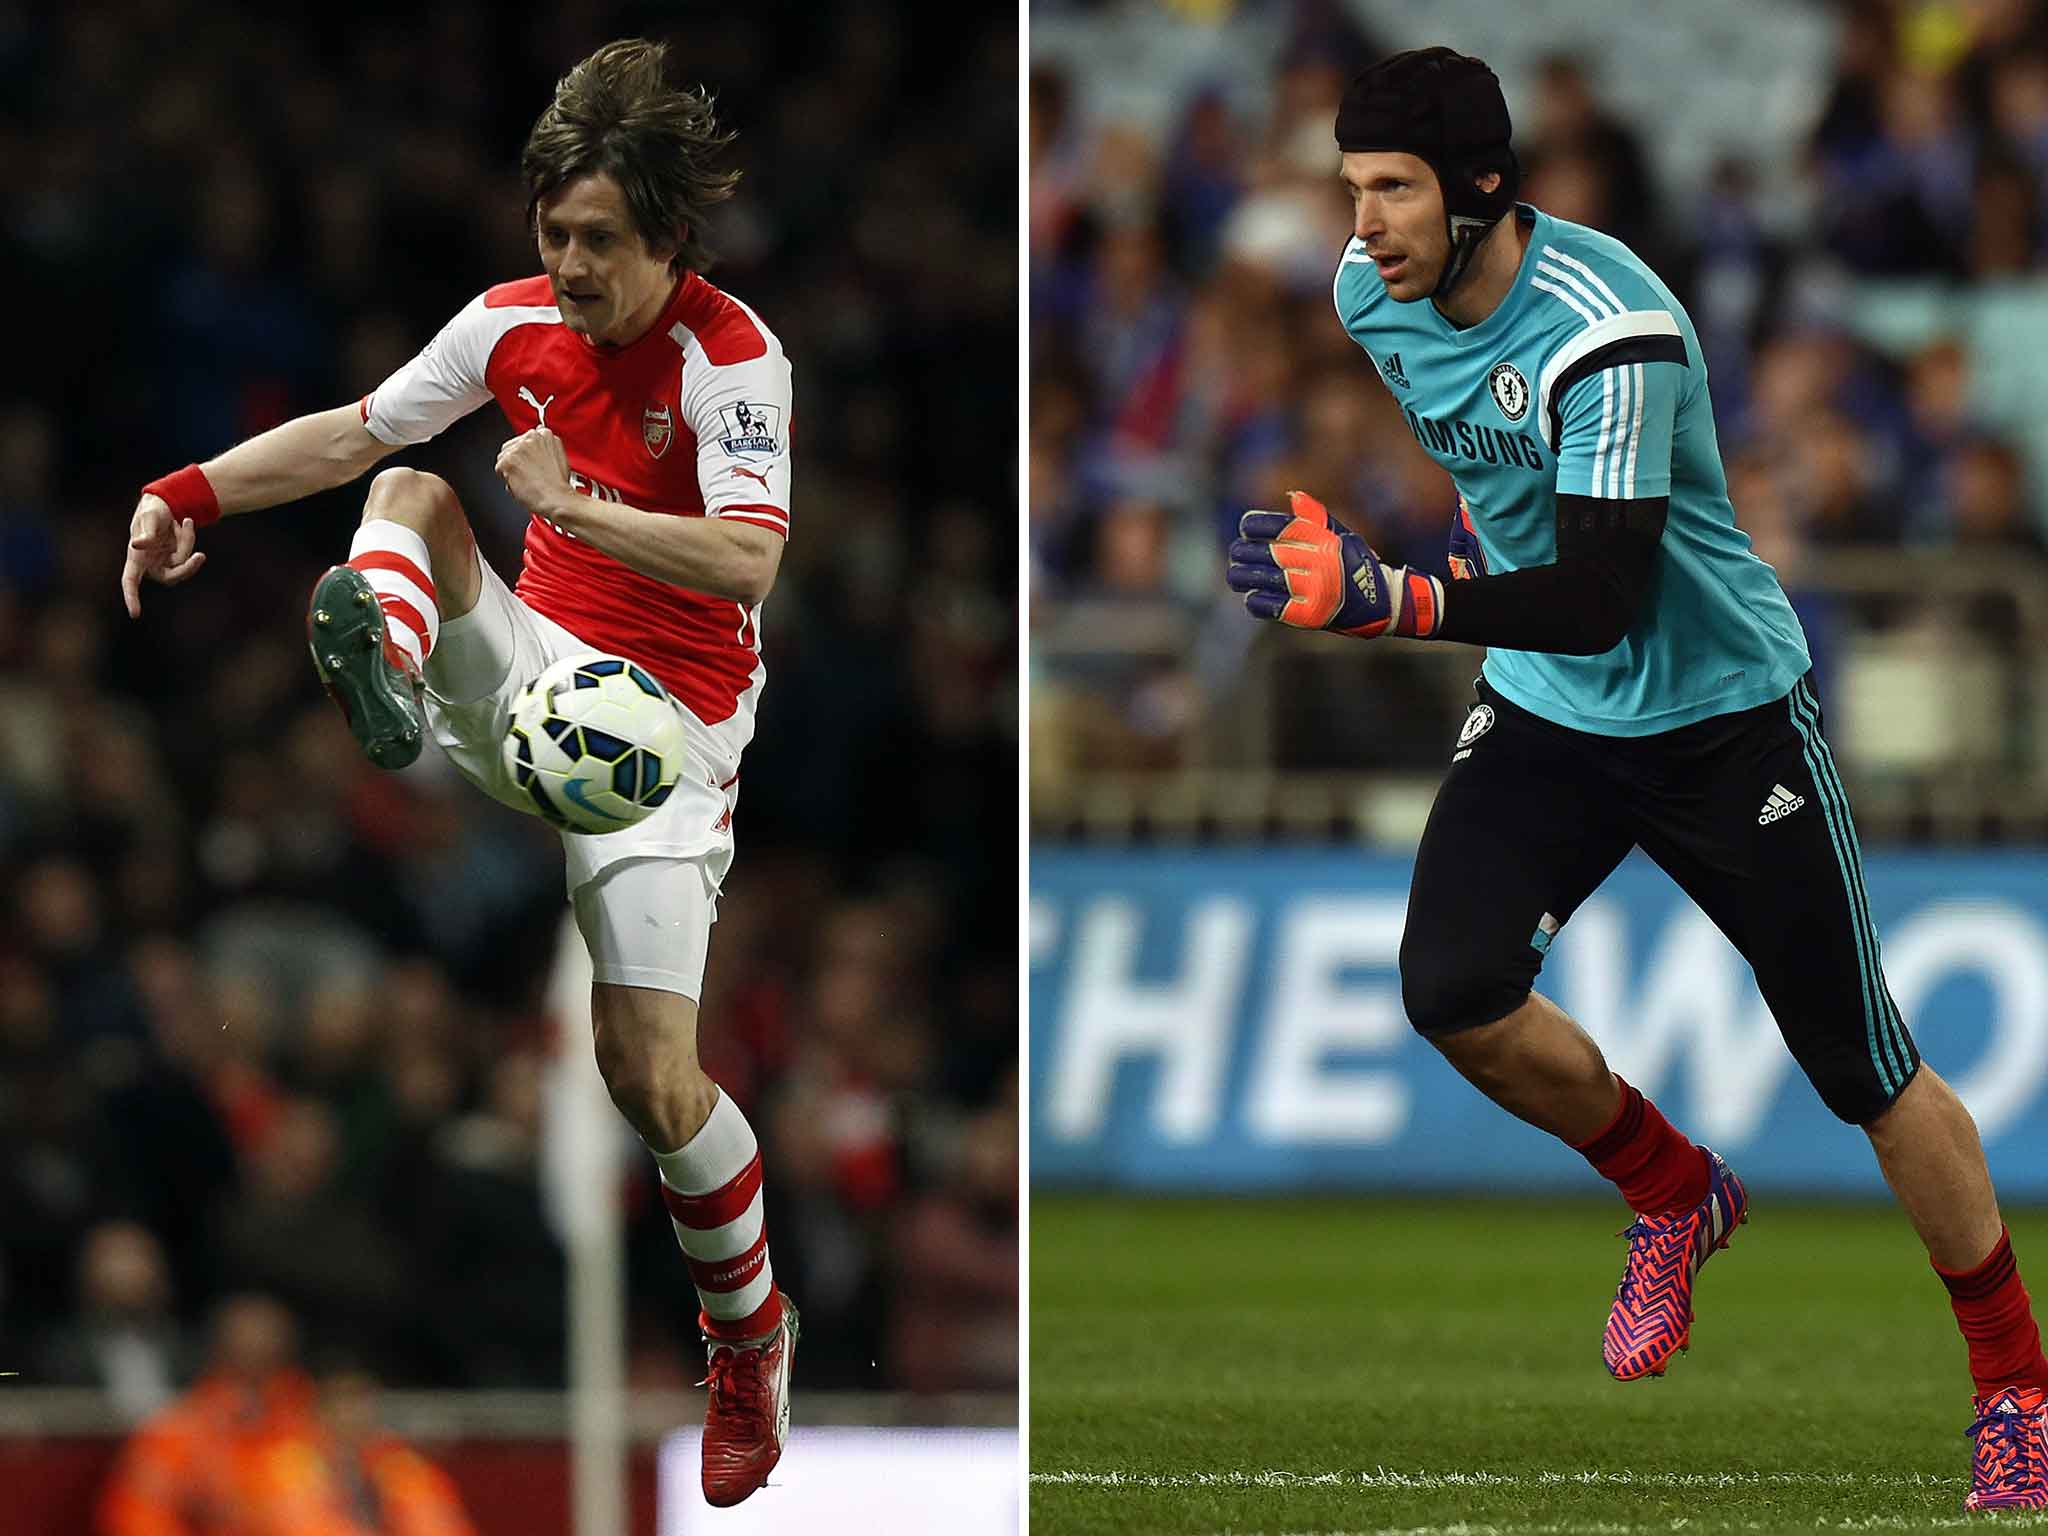 Tomas Rosicky and Petr Cech